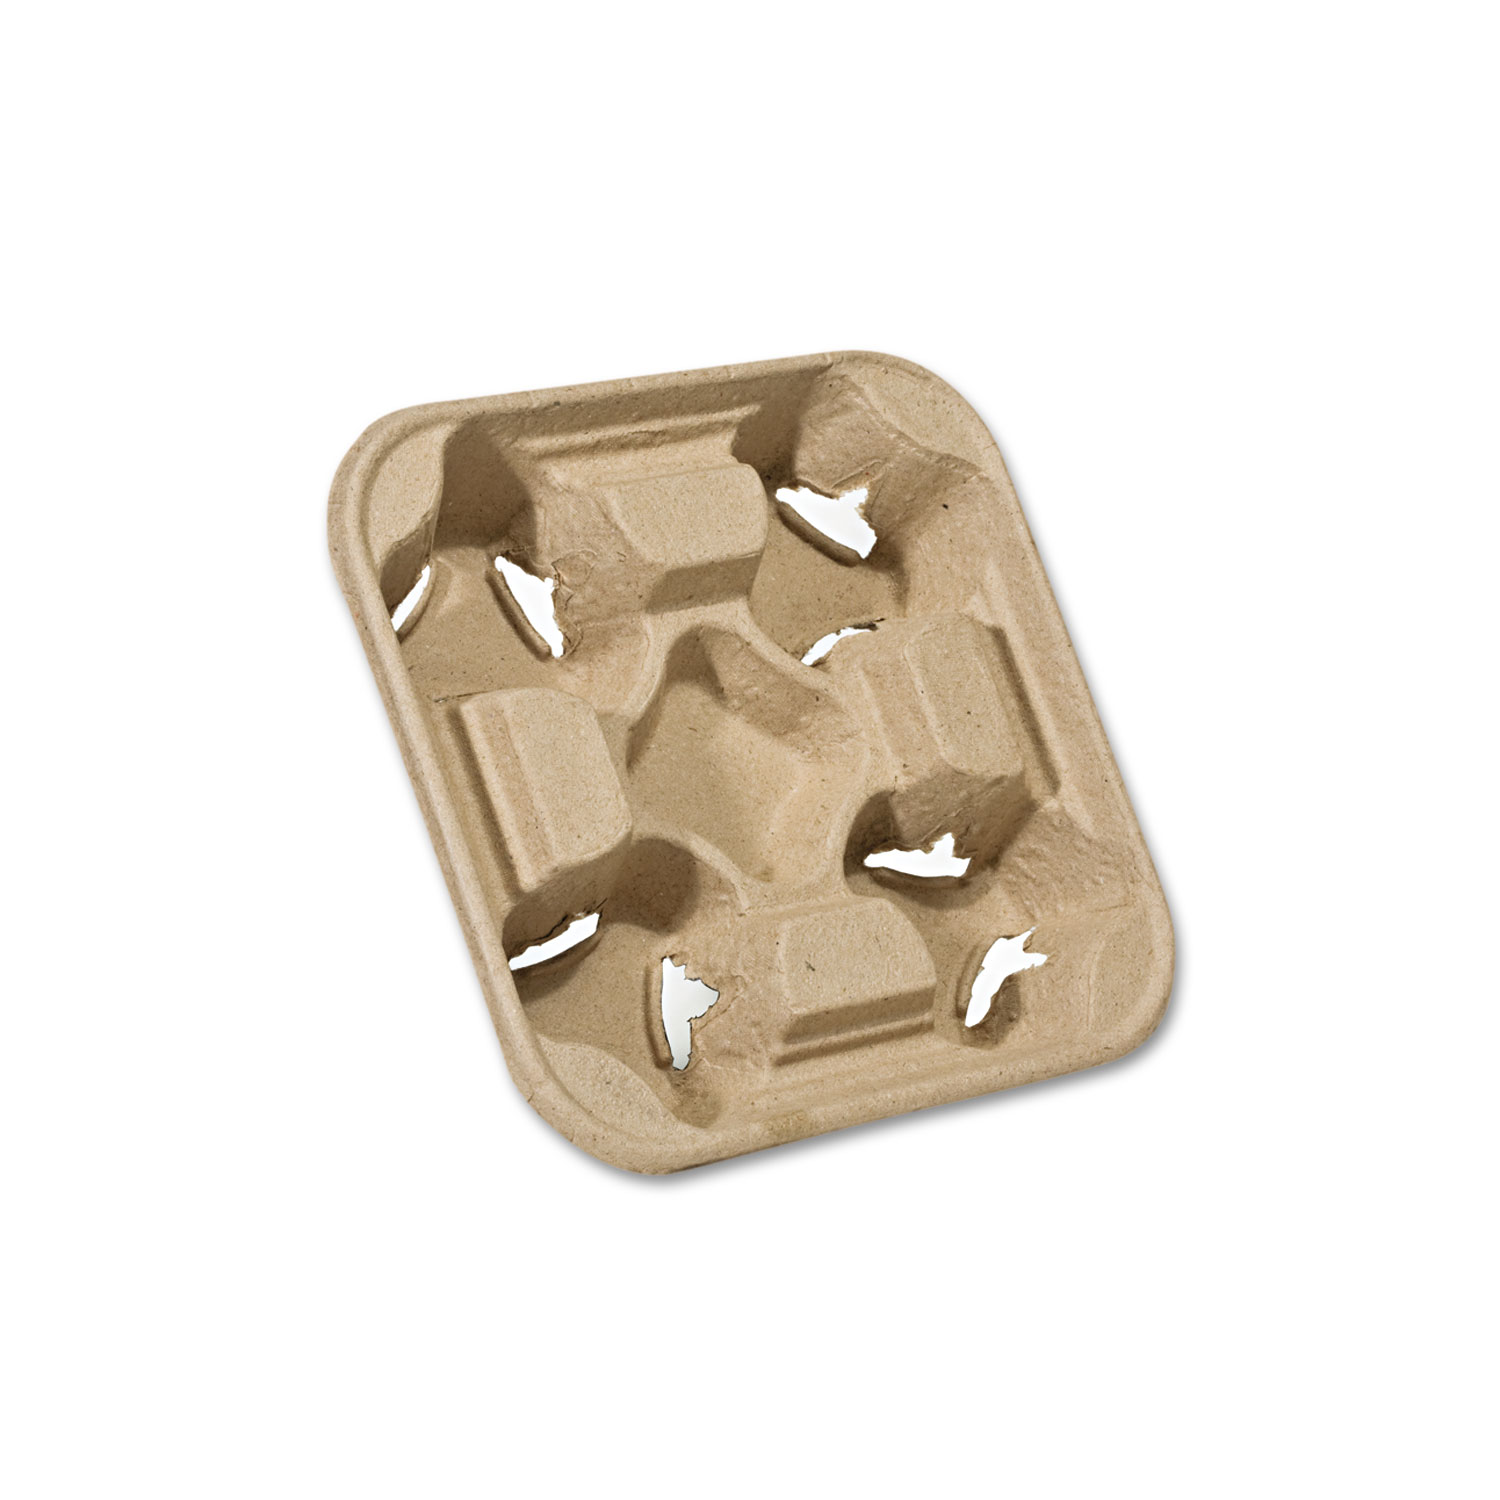 Heavyweight 4-Cup Carry Tray, 6 x 2 x 6, Natural, 300/Carton